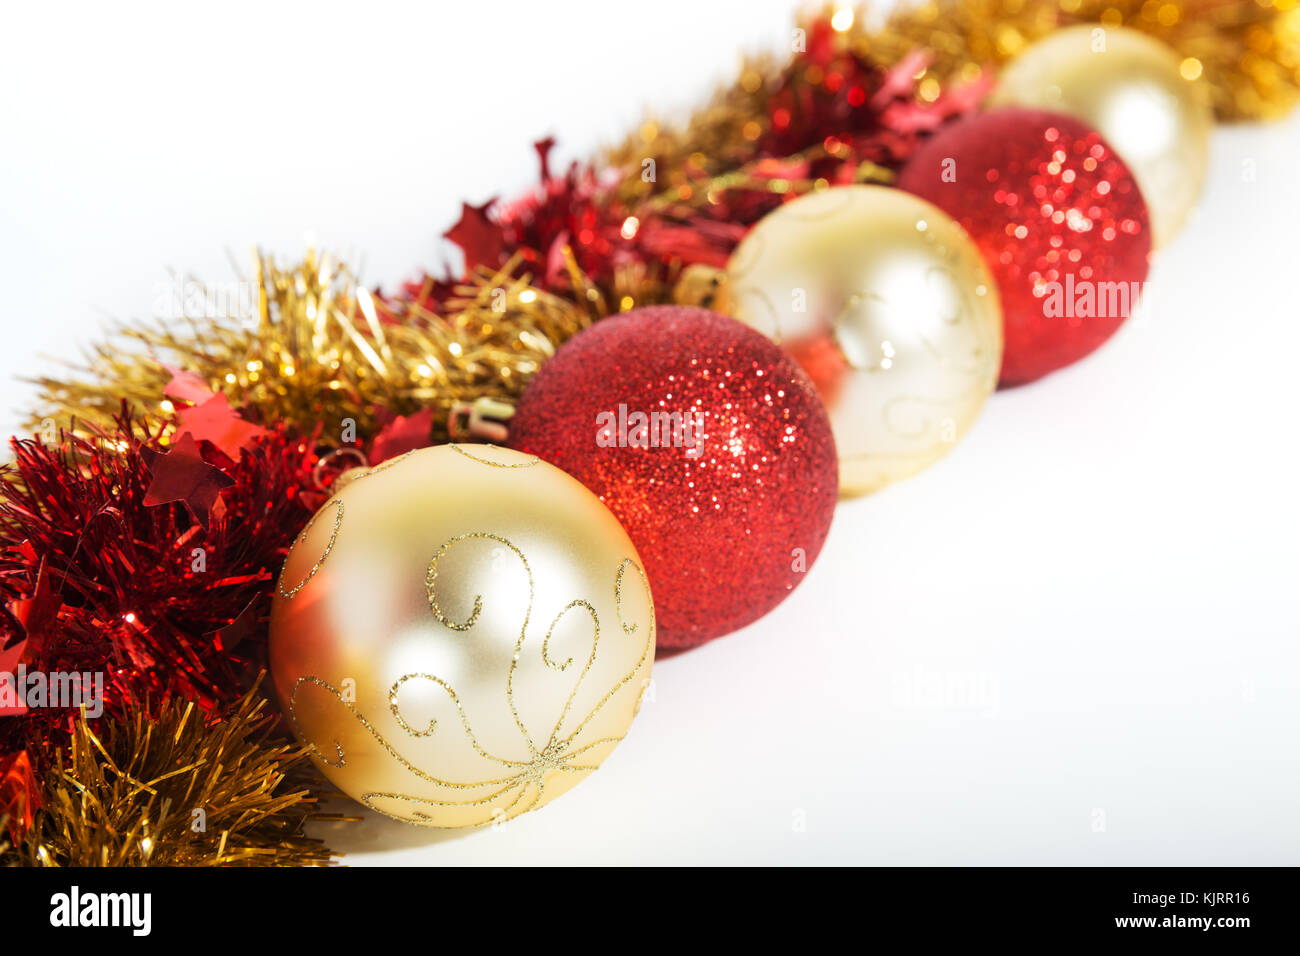 Christmas decorations ofred and golden color on a white background - balls and tinsel Stock Photo